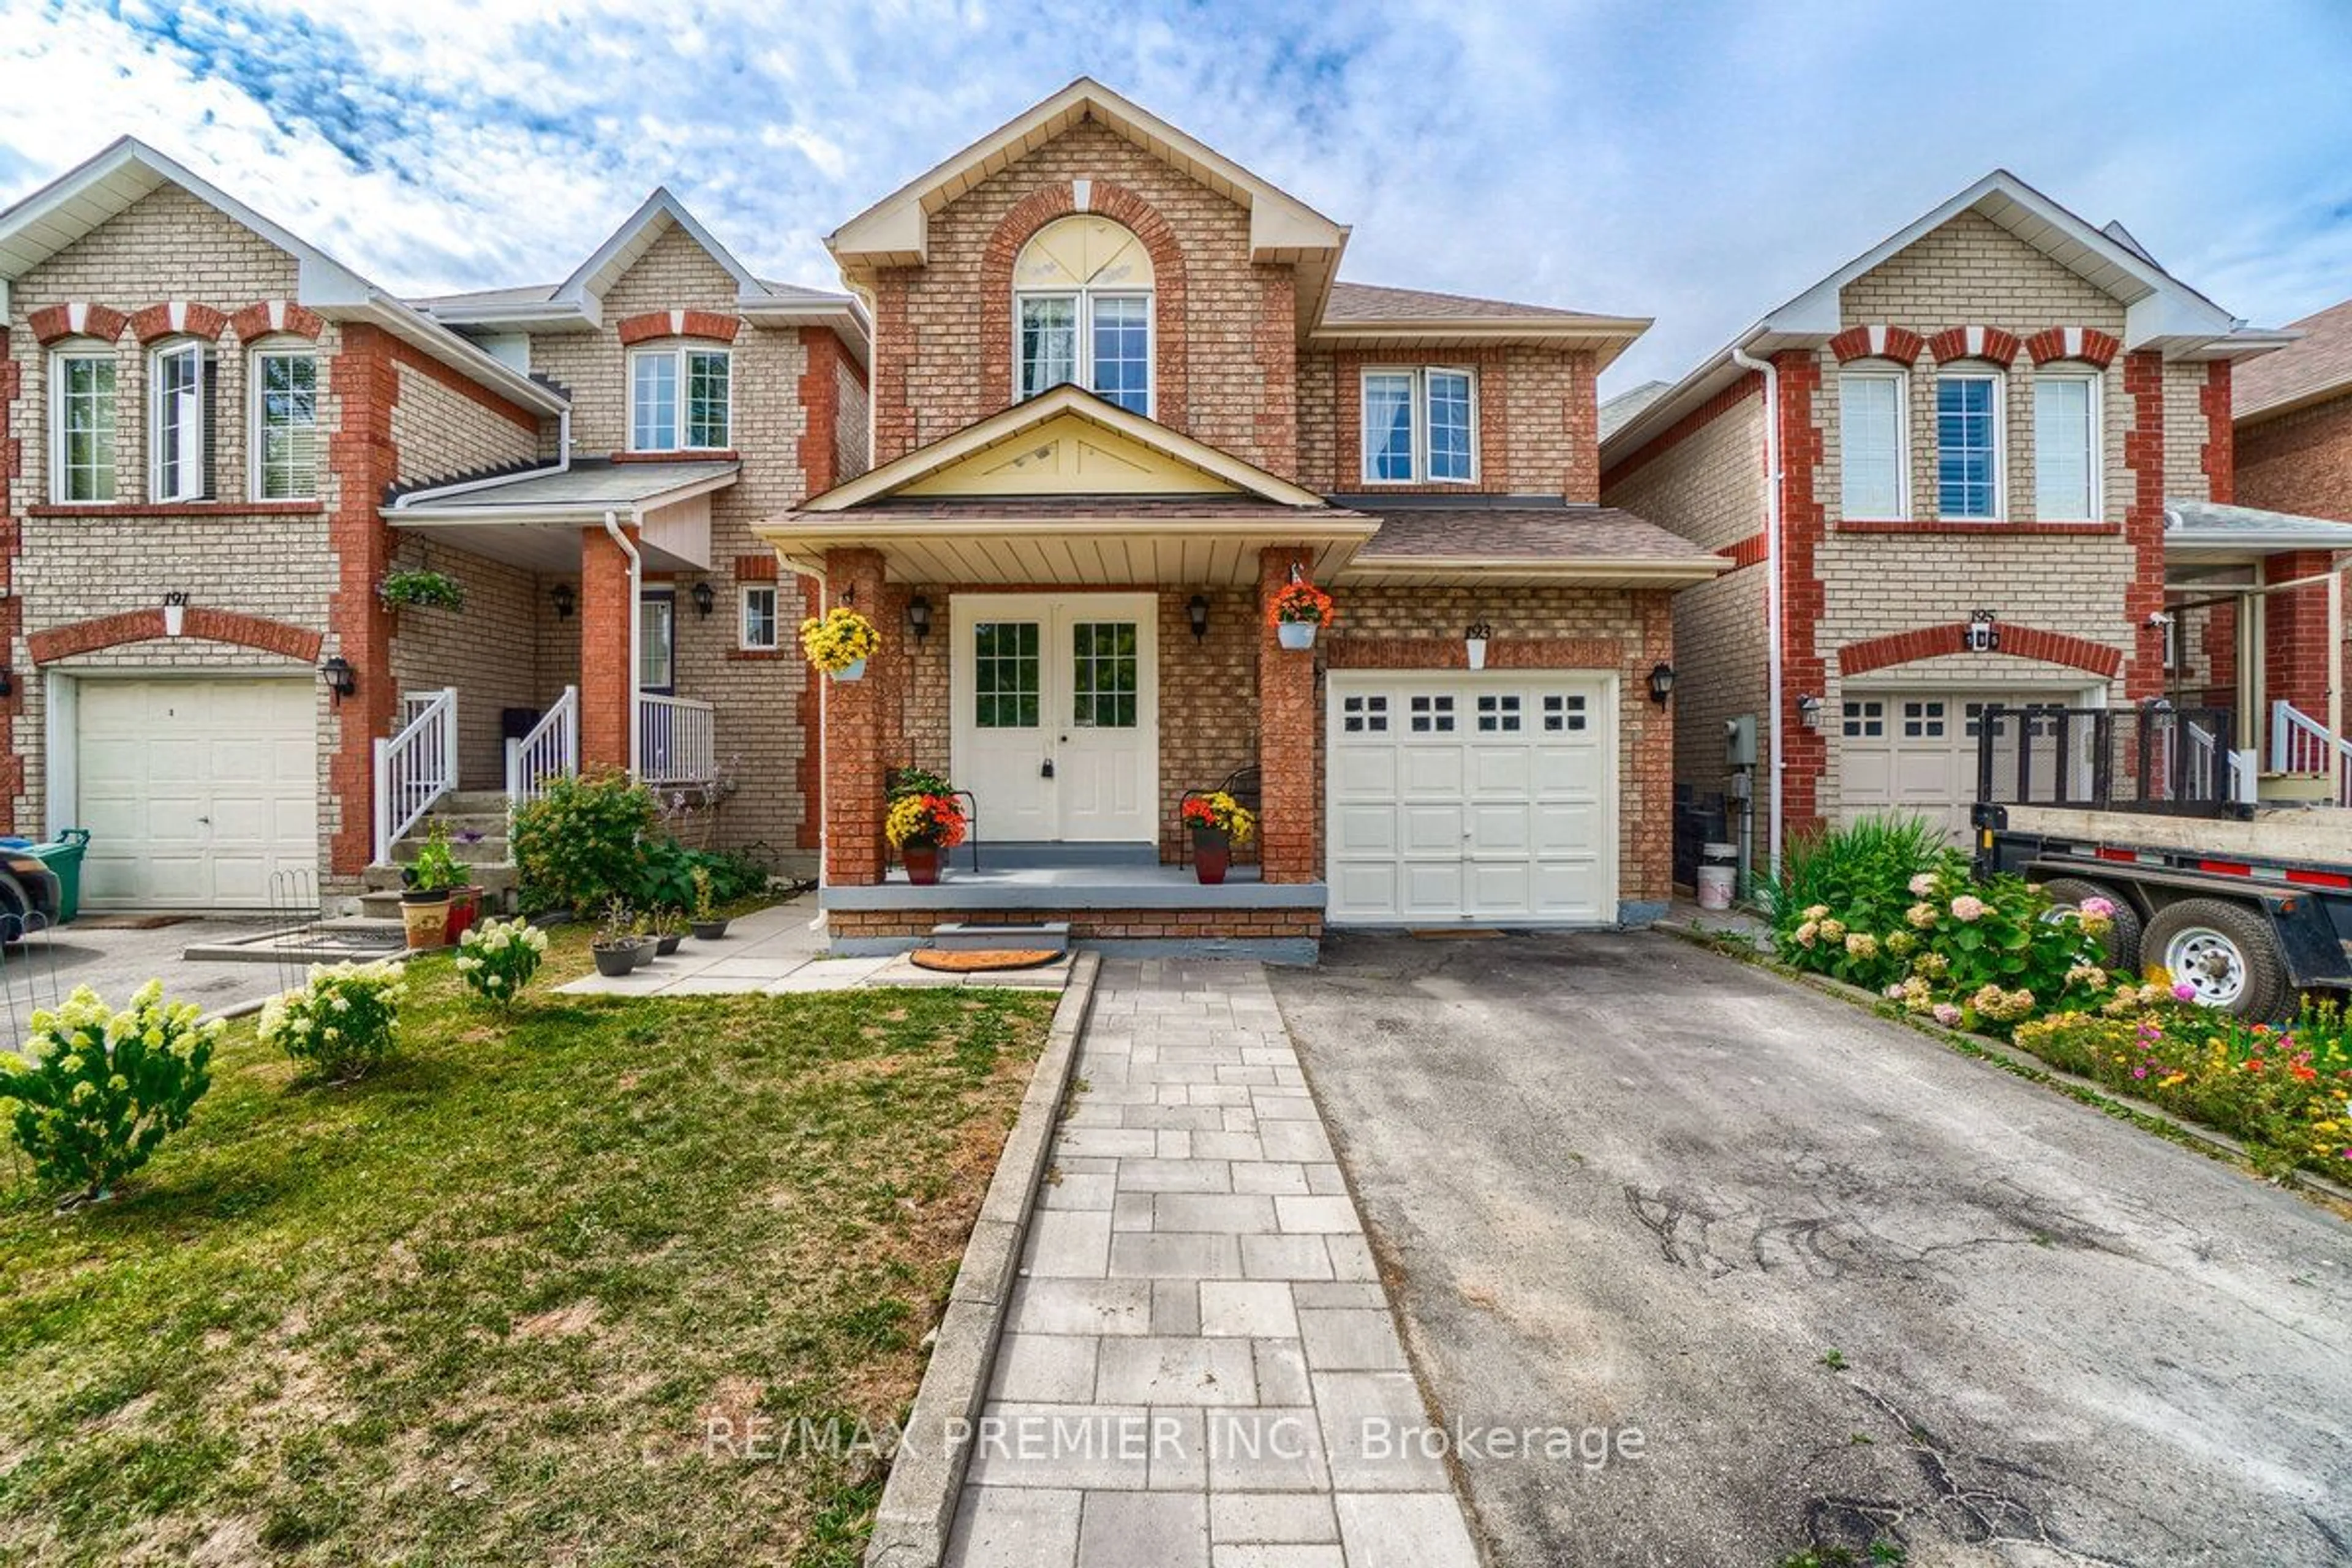 Home with brick exterior material for 193 Roxbury St, Markham Ontario L3S 3T5